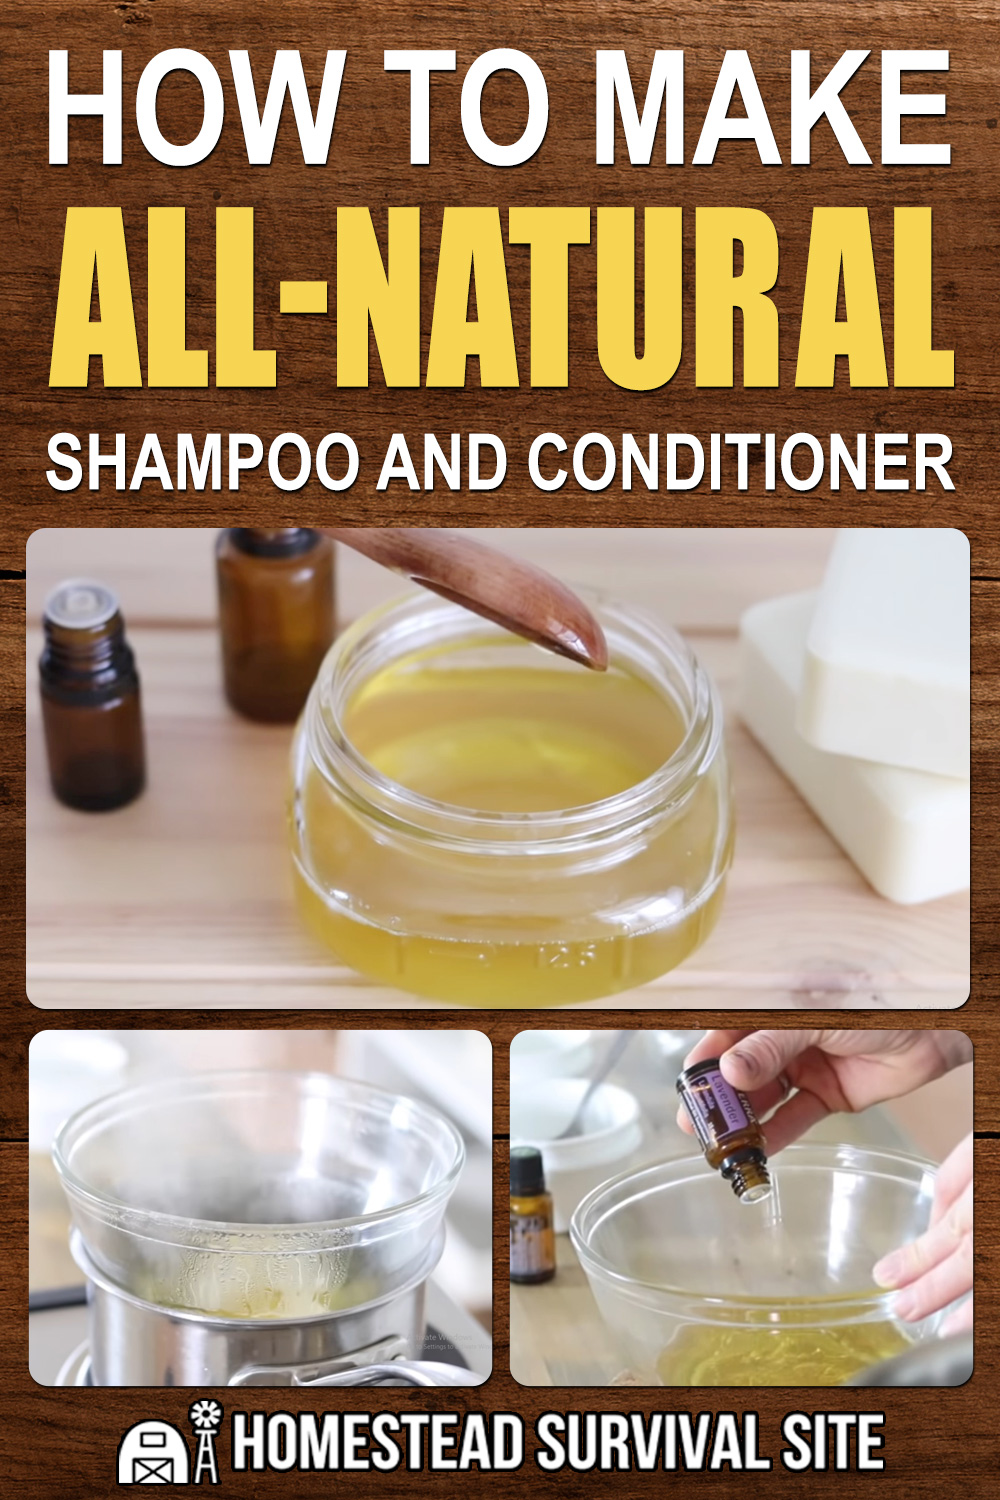 How to Make All-Natural Shampoo and Conditioner